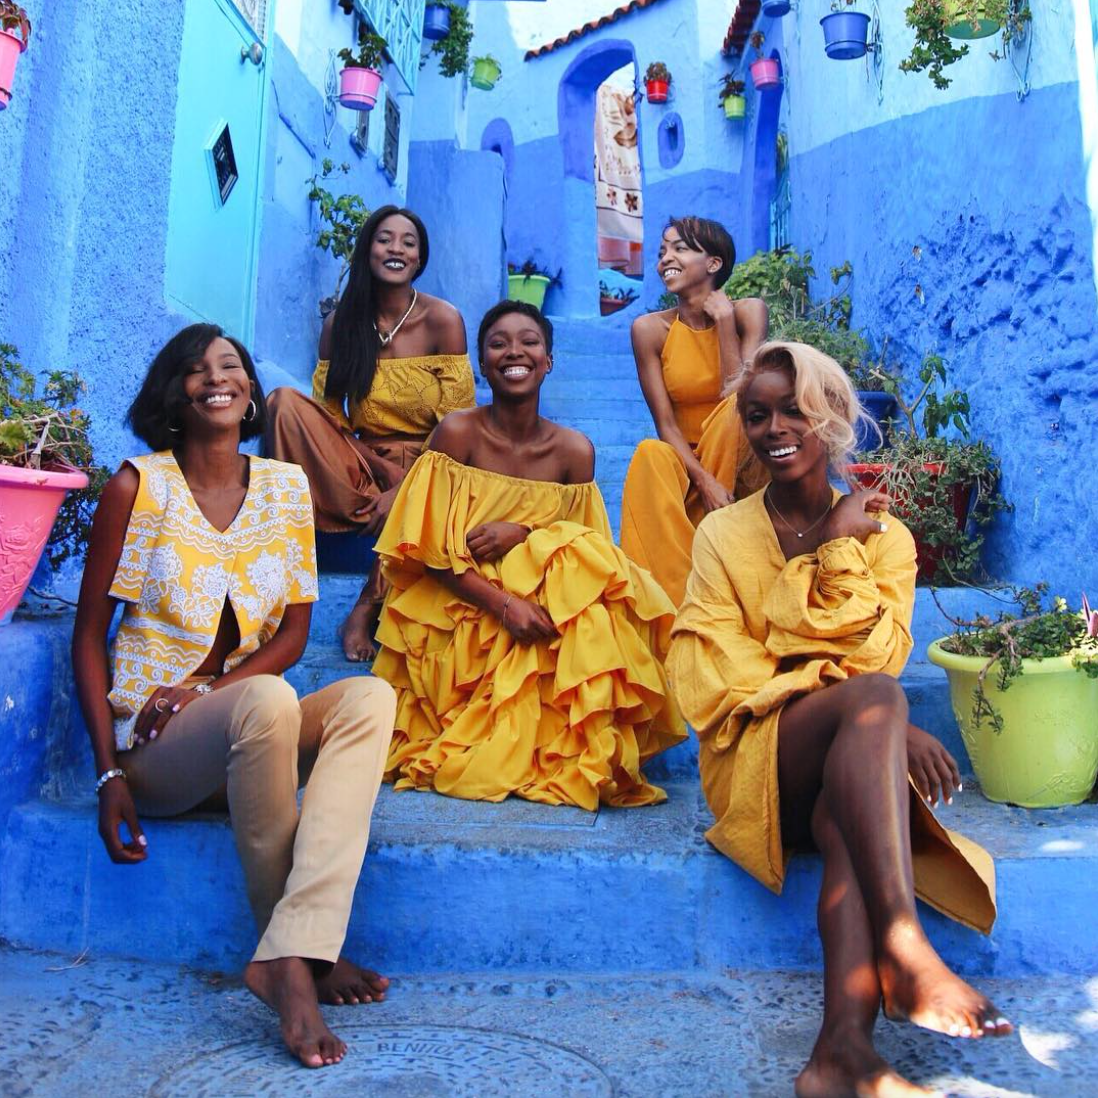 Squad Goals! 10 Amazing Group Travel Photos That Will Make You Book A Flight Today
